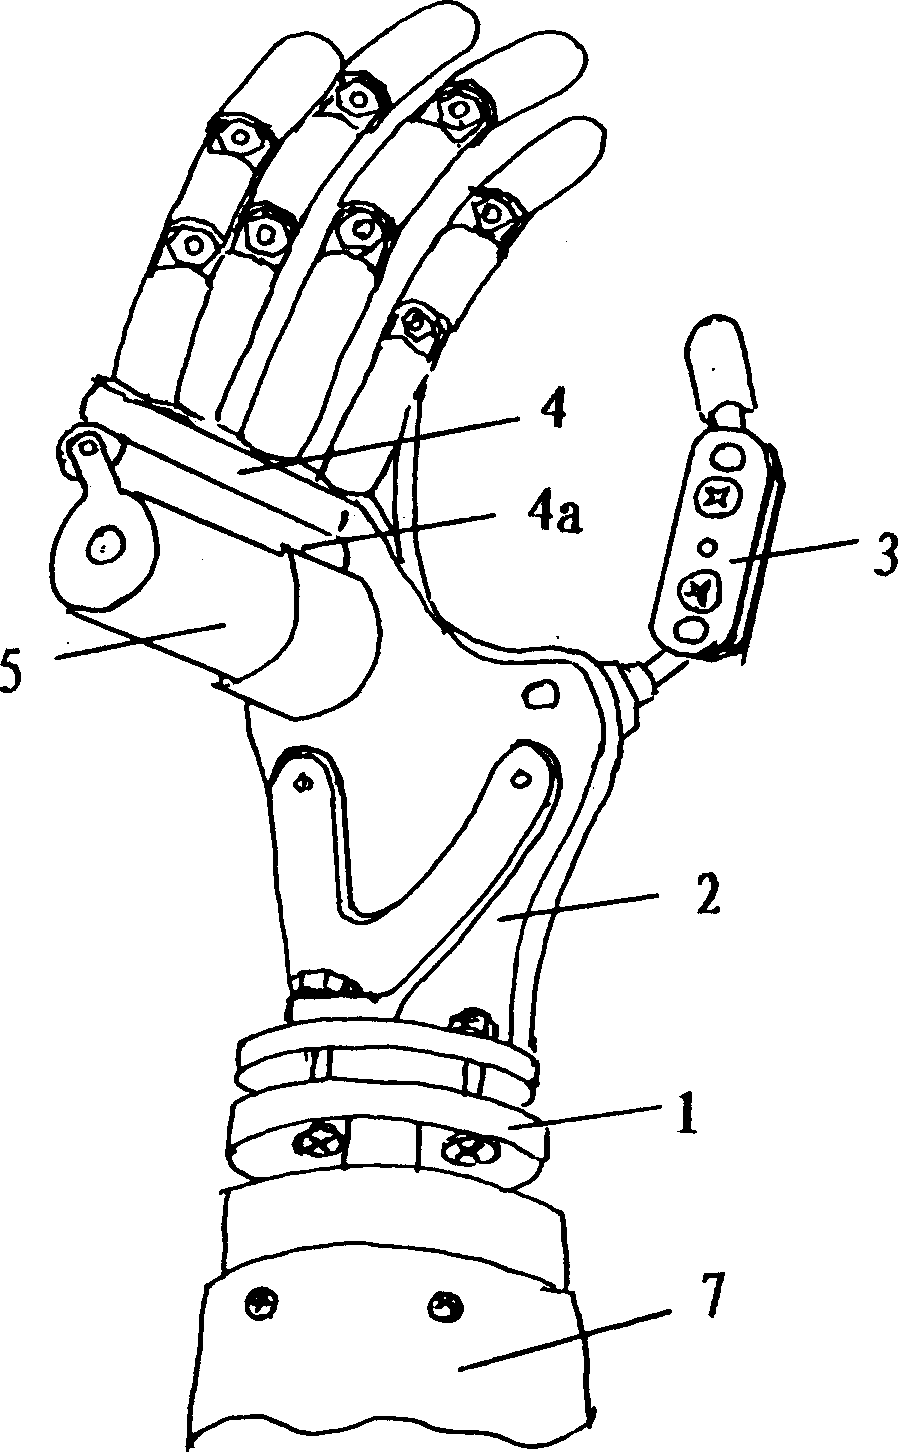 Simulated electronic artificial hand